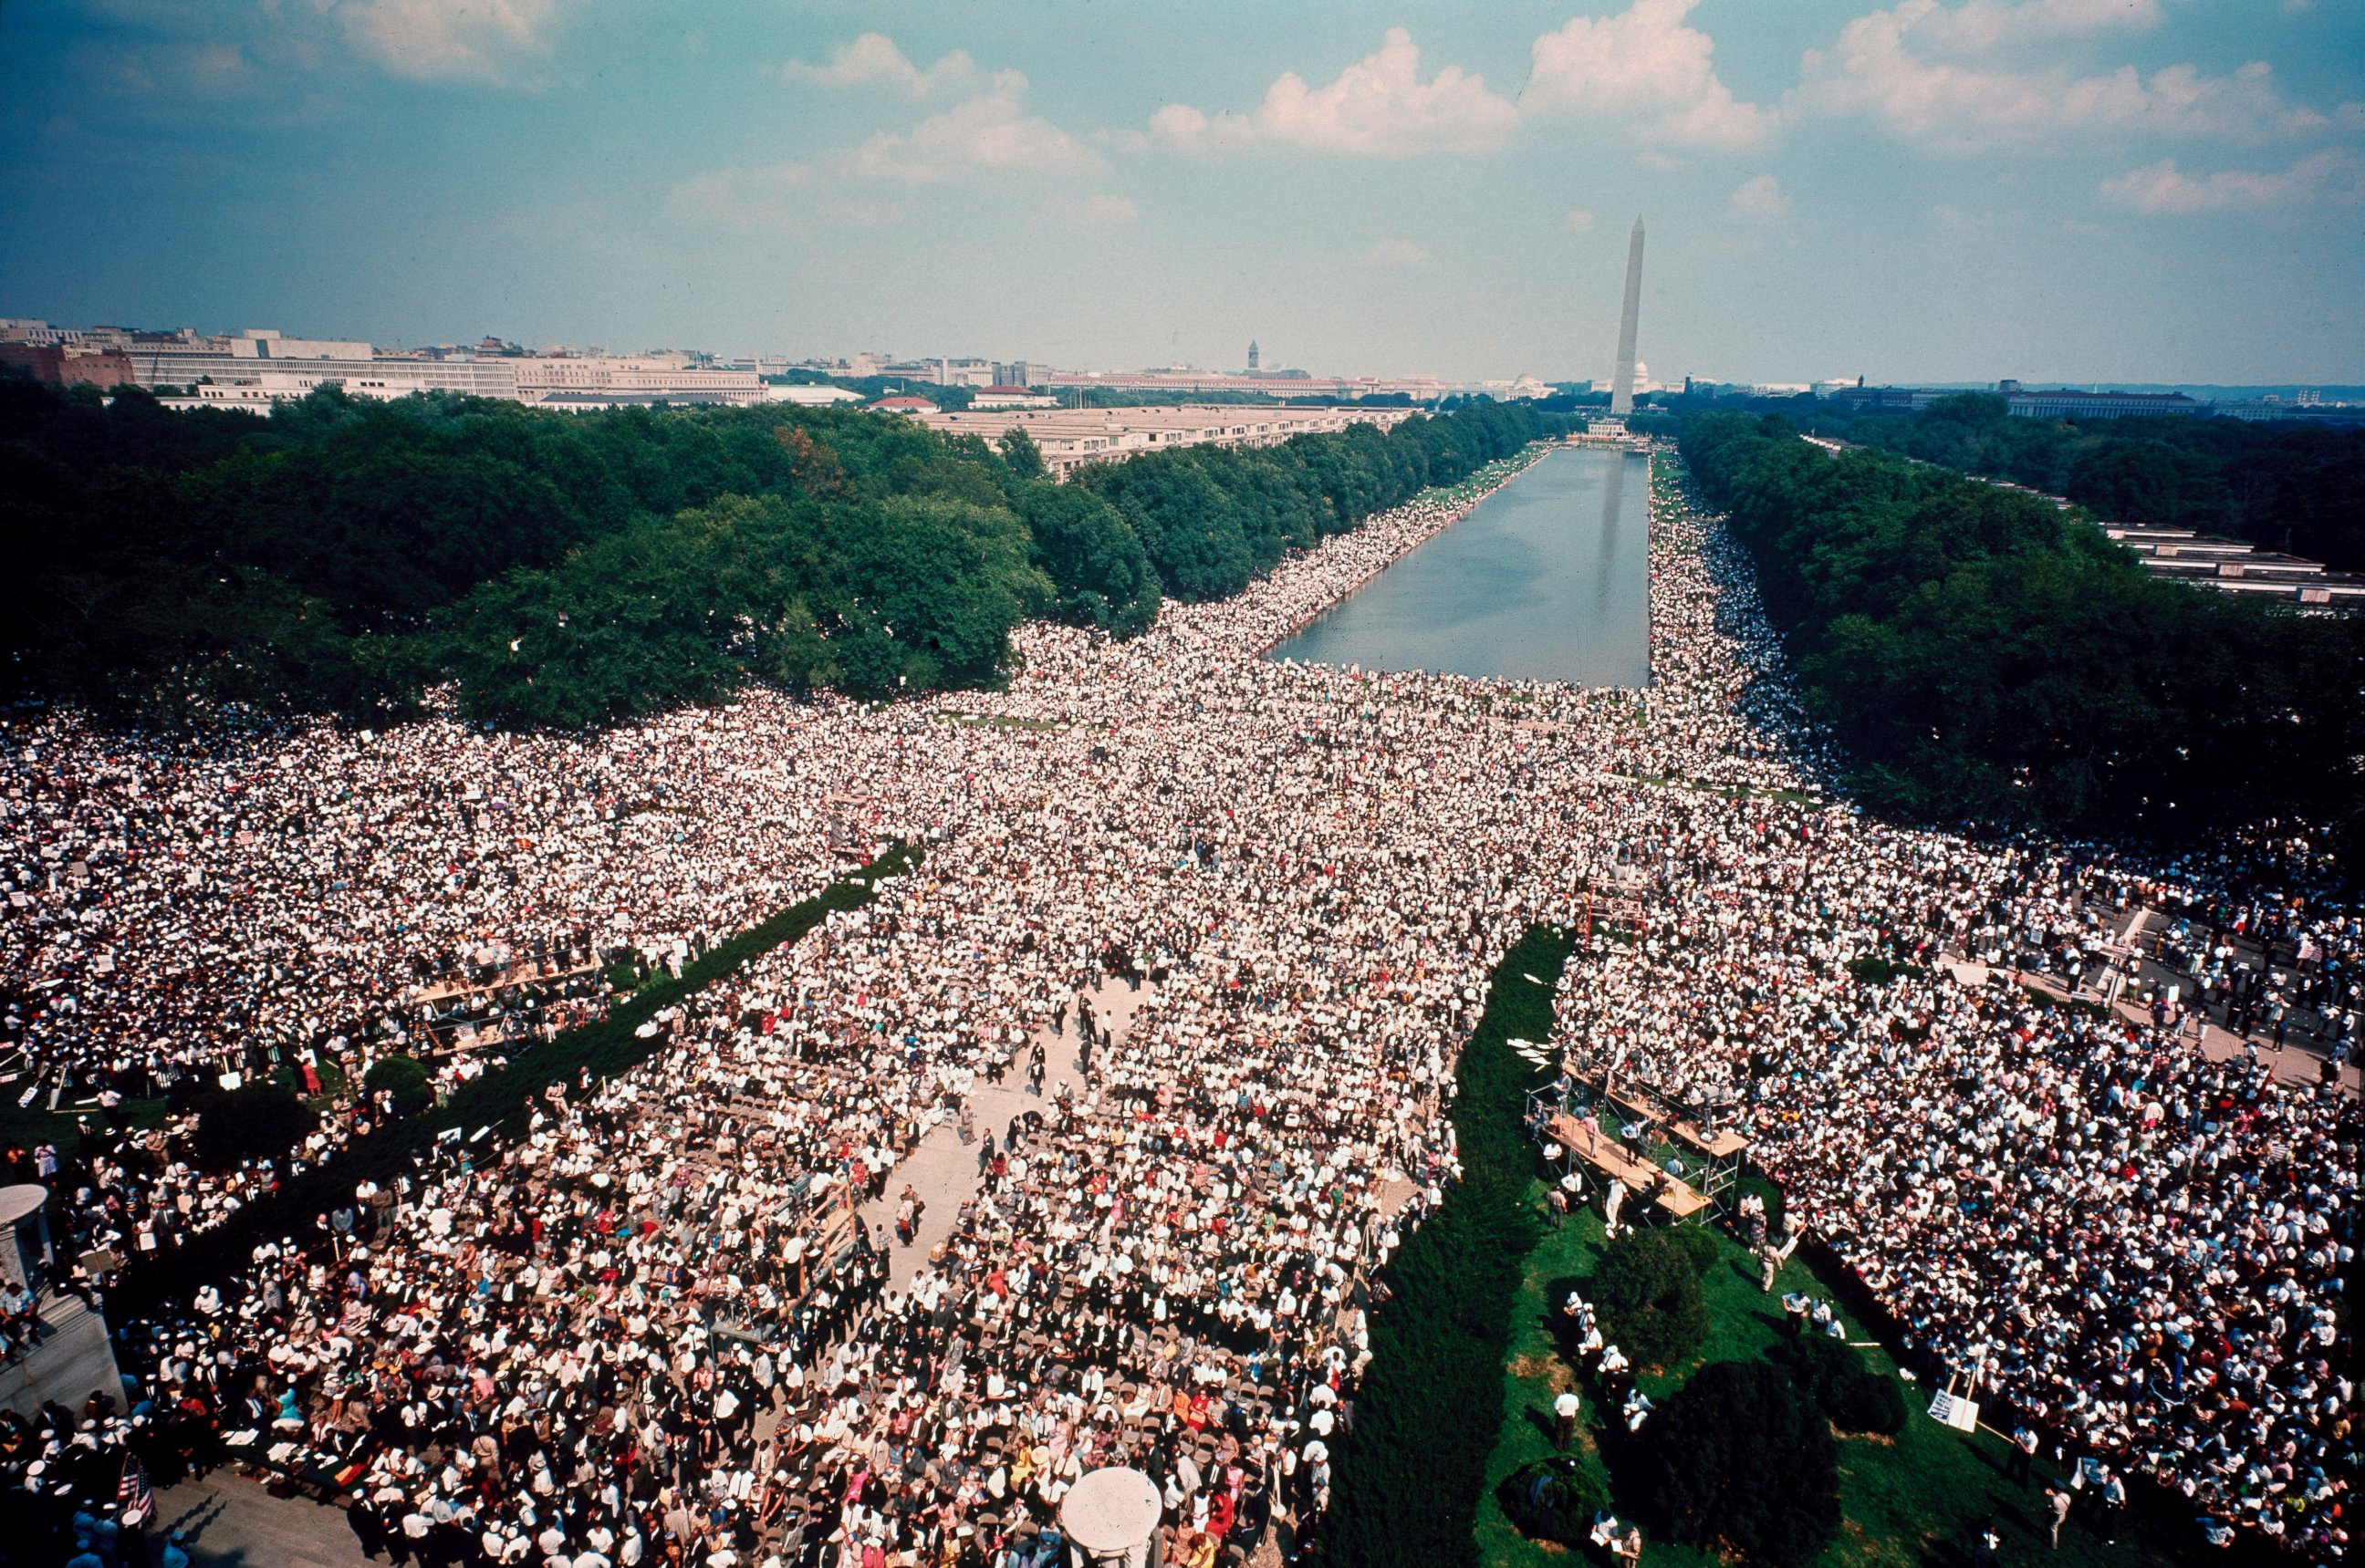 PHOTO: Overhead view of the crowd assembled on the Mall in front of the Reflecting Pool and between the Lincoln and Washington monuments during the civil rights March on Washington for Jobs and Freedom, Washington DC, August 28, 1963. 